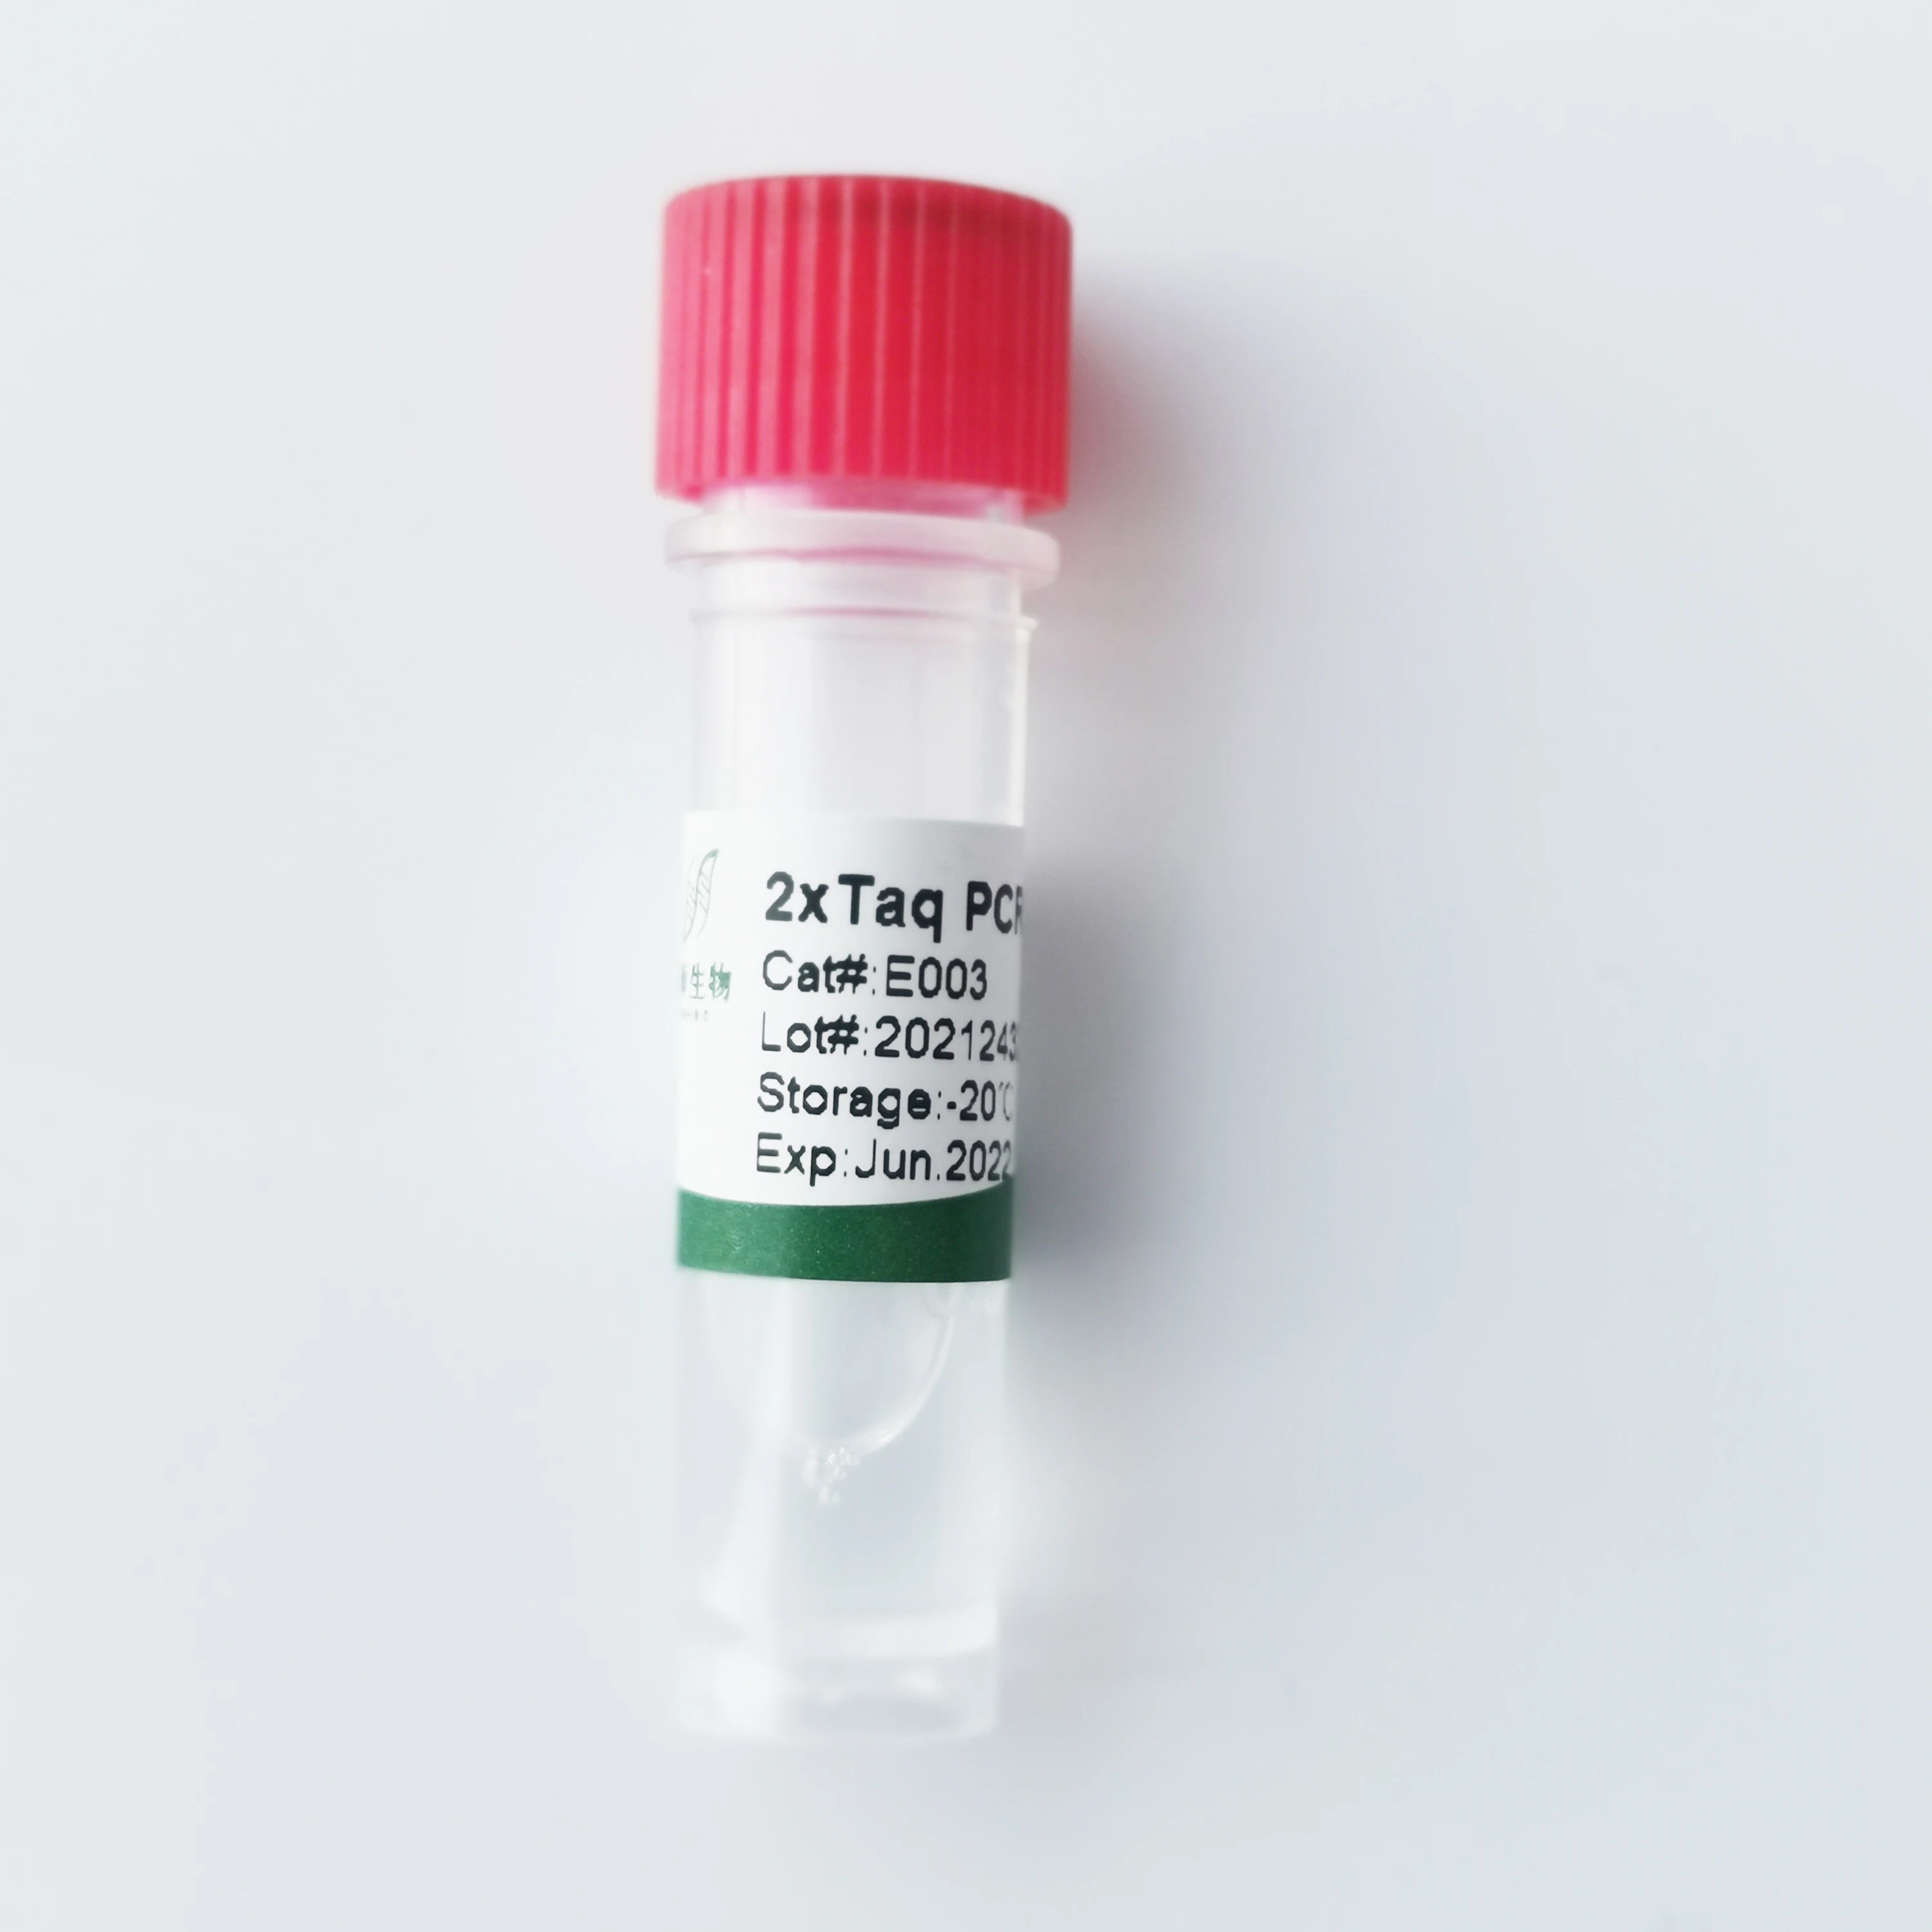 Hot selling good quality 2x taq pcr master mix (without dye) chemical reagents china (1600336858823)